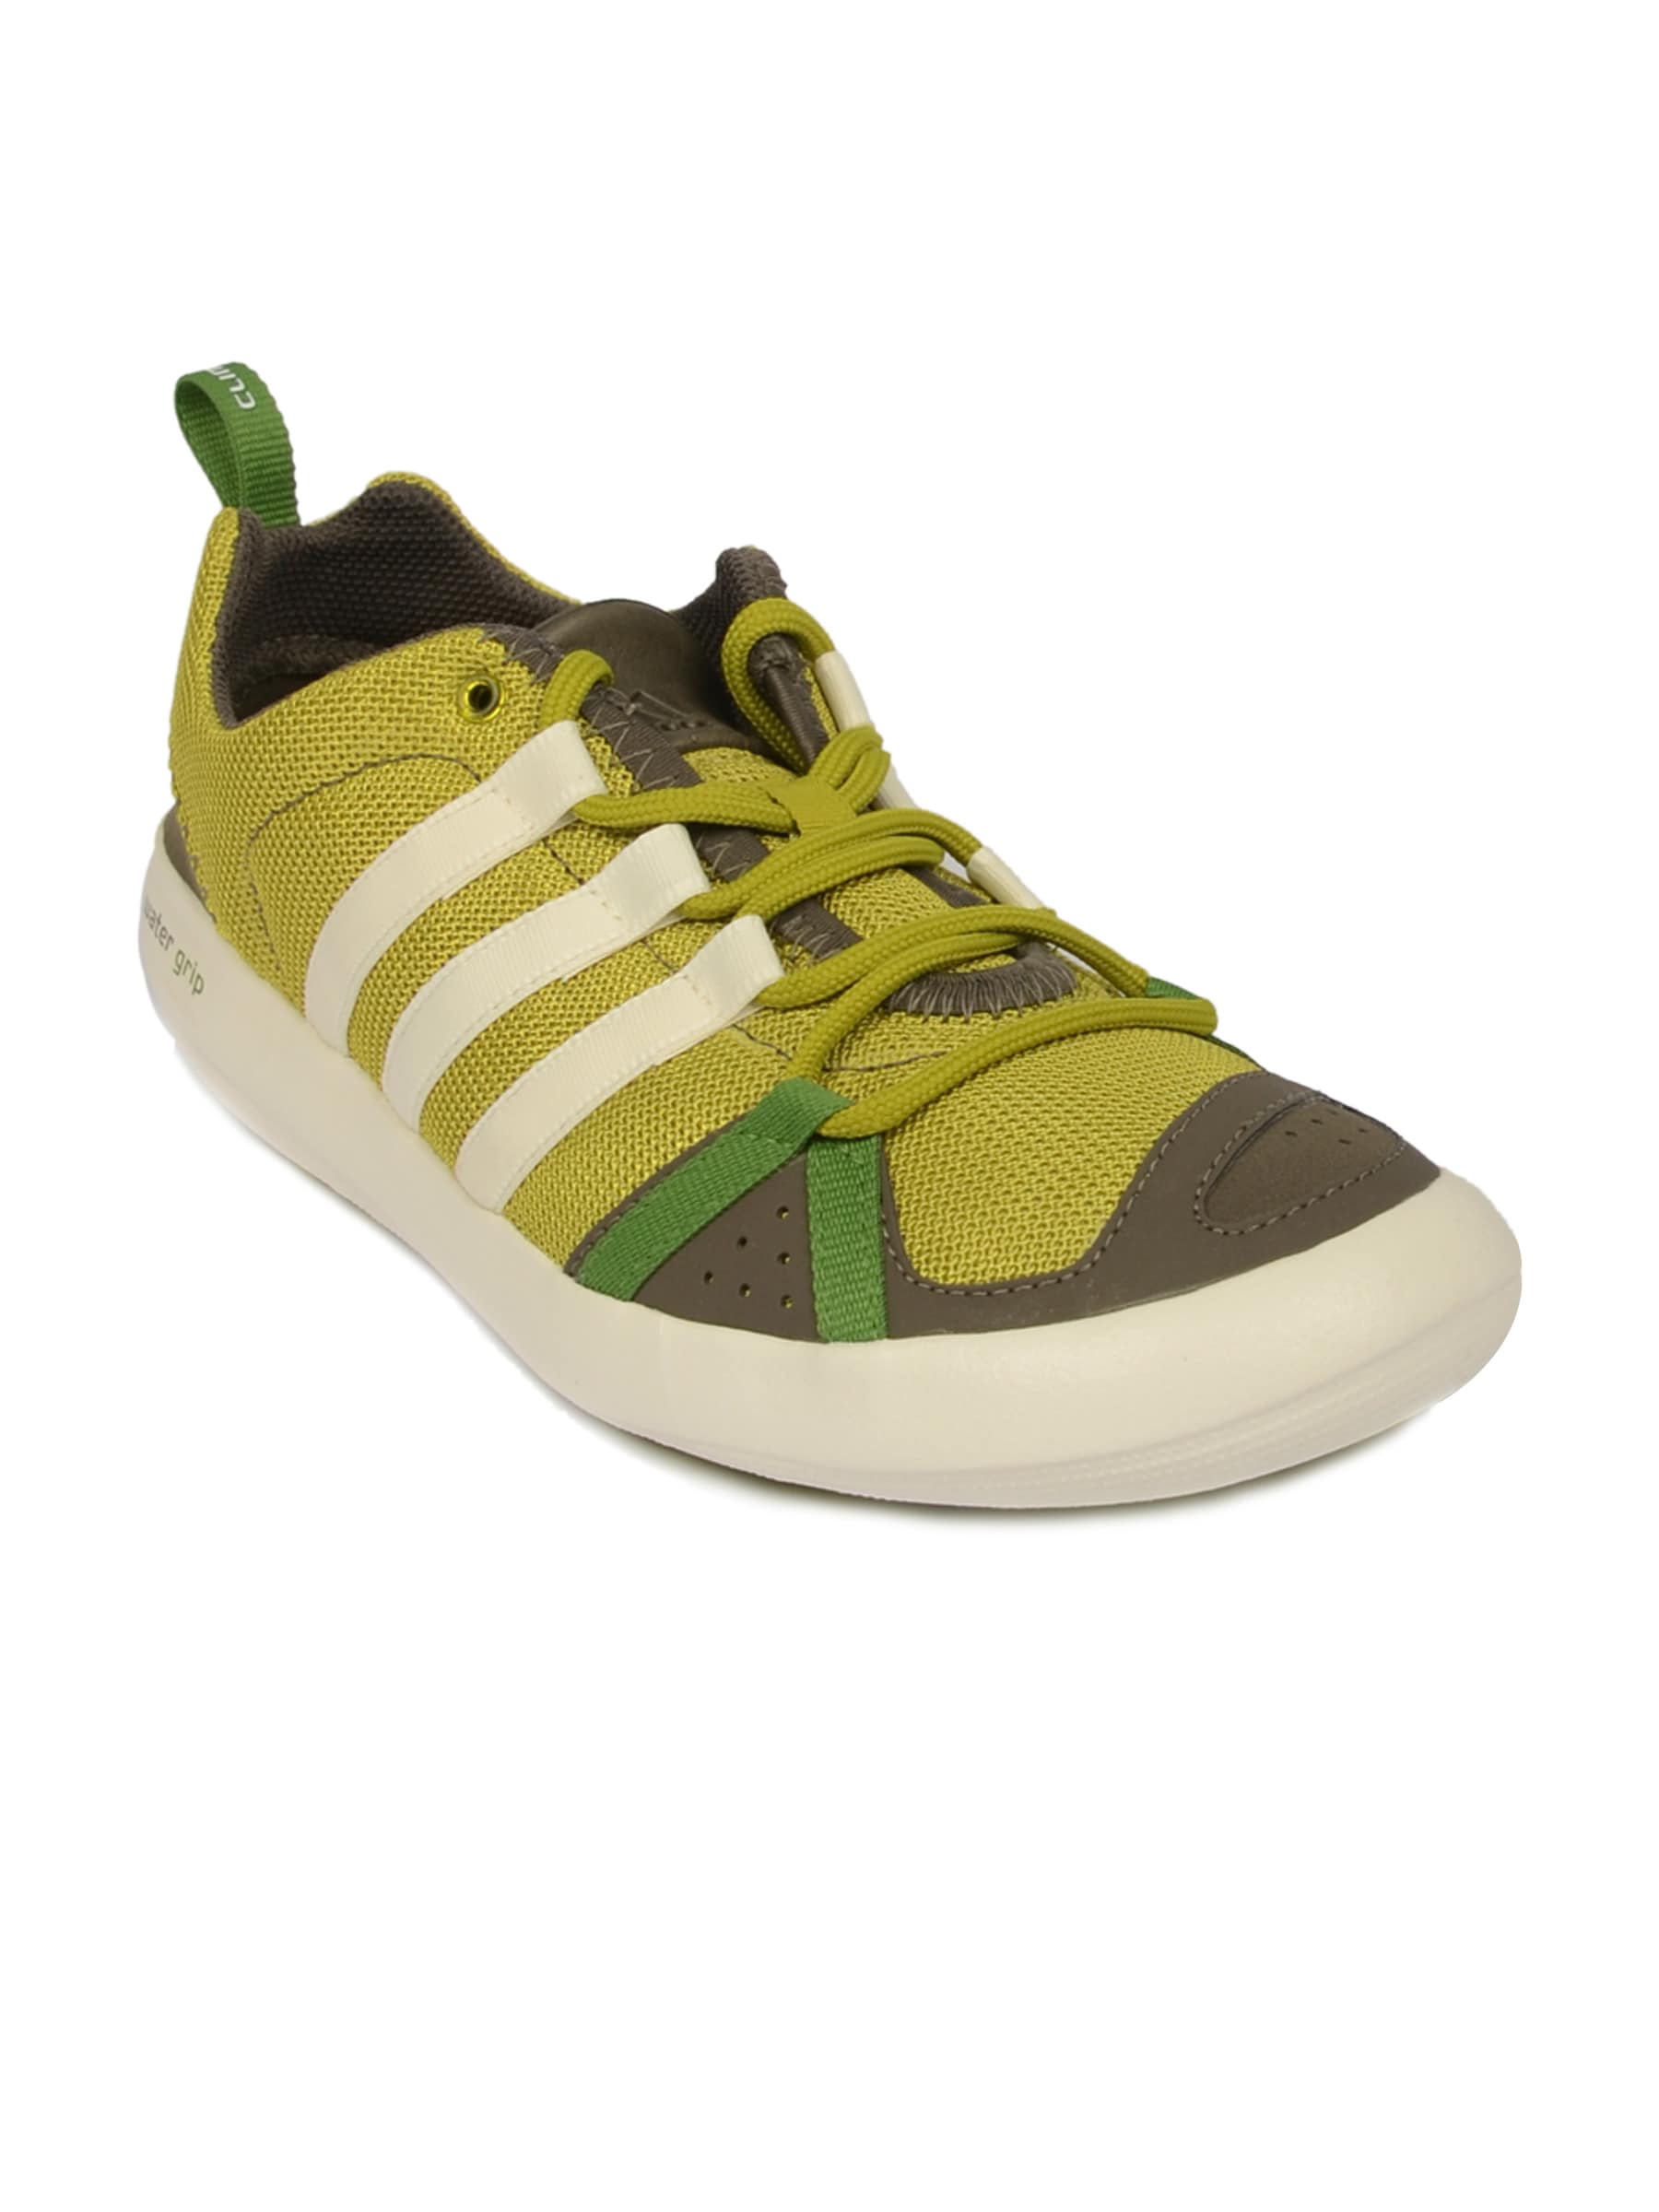 ADIDAS Men Boat Cc Lace Green Sports Shoes